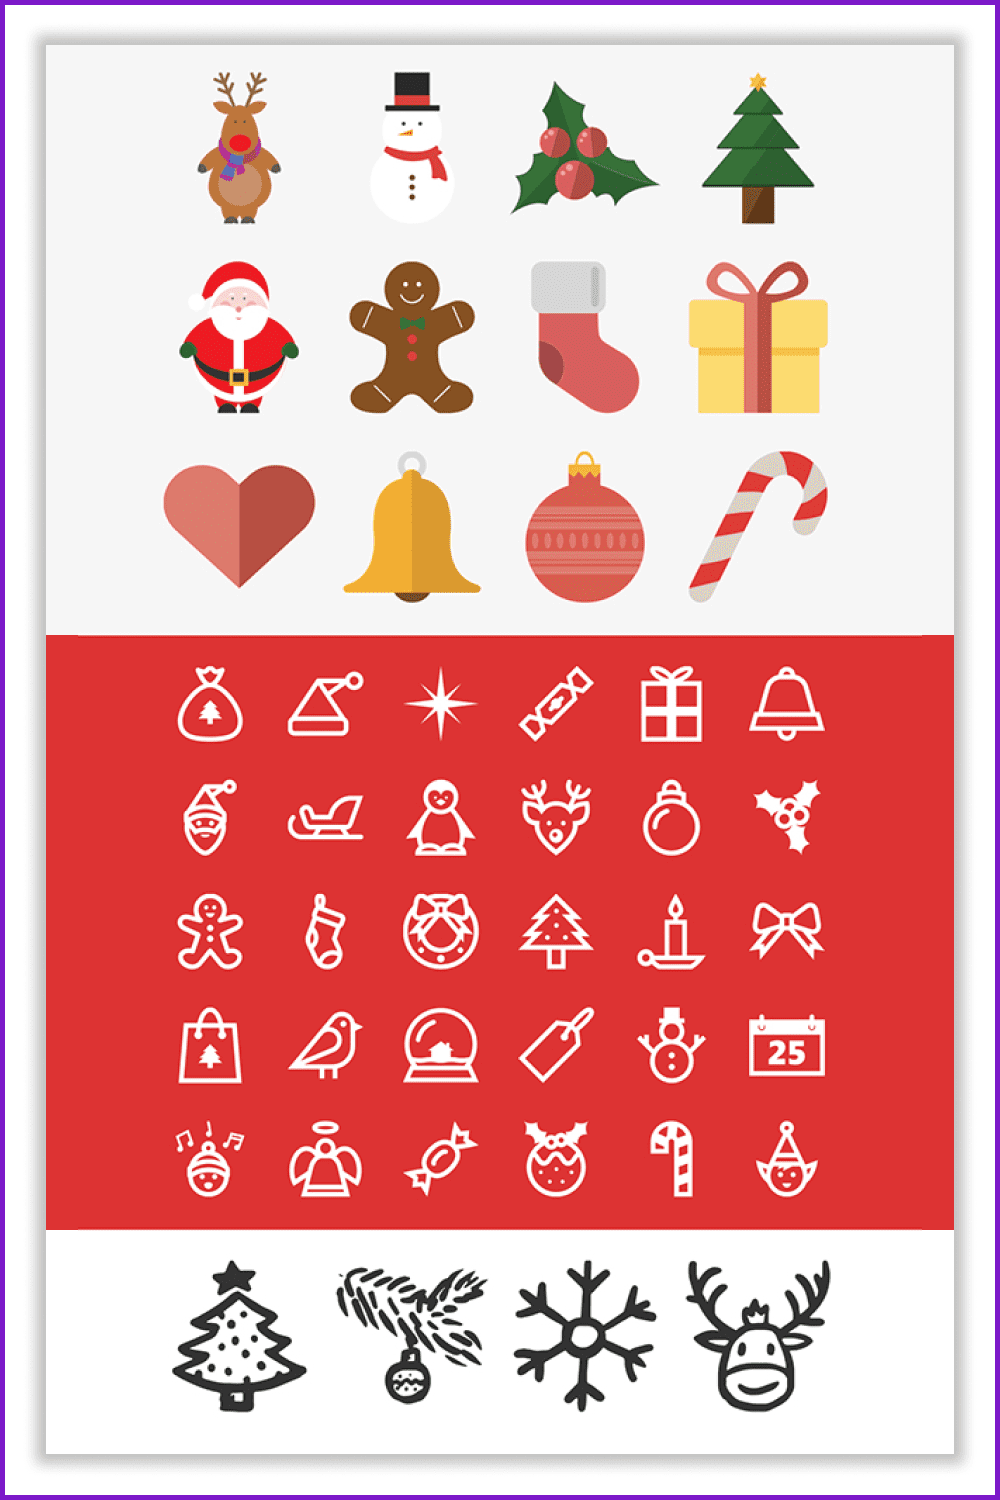 A collage of colored and single-color icons on the theme of Christmas.